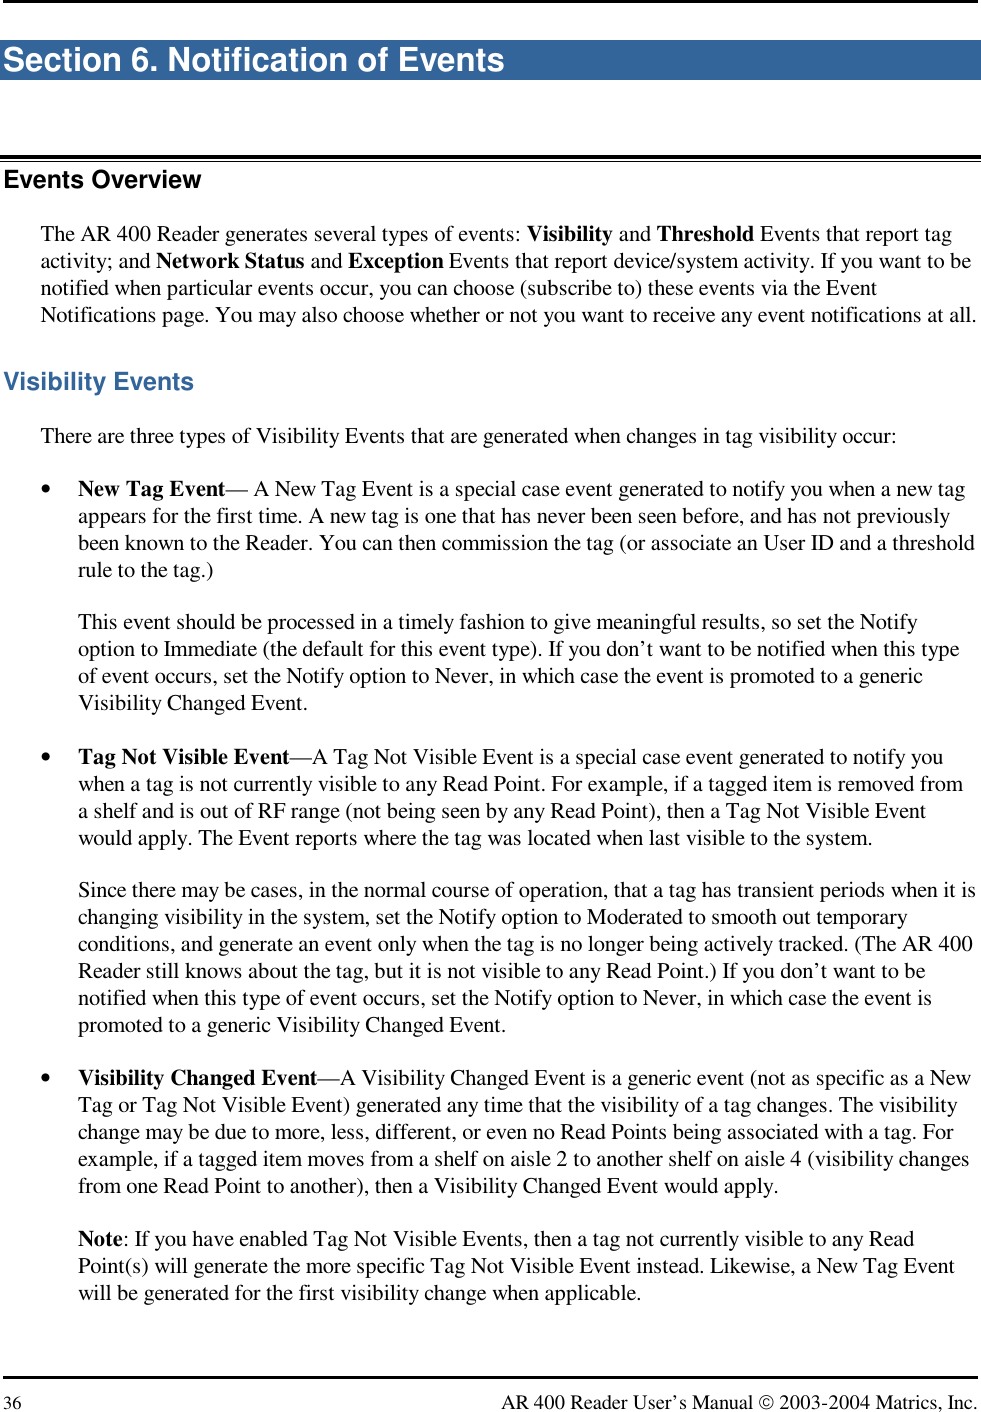  36  AR 400 Reader User’s Manual  2003-2004 Matrics, Inc. Section 6. Notification of Events Events Overview The AR 400 Reader generates several types of events: Visibility and Threshold Events that report tag activity; and Network Status and Exception Events that report device/system activity. If you want to be notified when particular events occur, you can choose (subscribe to) these events via the Event Notifications page. You may also choose whether or not you want to receive any event notifications at all. Visibility Events There are three types of Visibility Events that are generated when changes in tag visibility occur: •  New Tag Event— A New Tag Event is a special case event generated to notify you when a new tag appears for the first time. A new tag is one that has never been seen before, and has not previously been known to the Reader. You can then commission the tag (or associate an User ID and a threshold rule to the tag.) This event should be processed in a timely fashion to give meaningful results, so set the Notify option to Immediate (the default for this event type). If you don’t want to be notified when this type of event occurs, set the Notify option to Never, in which case the event is promoted to a generic Visibility Changed Event. •  Tag Not Visible Event—A Tag Not Visible Event is a special case event generated to notify you when a tag is not currently visible to any Read Point. For example, if a tagged item is removed from a shelf and is out of RF range (not being seen by any Read Point), then a Tag Not Visible Event would apply. The Event reports where the tag was located when last visible to the system. Since there may be cases, in the normal course of operation, that a tag has transient periods when it is changing visibility in the system, set the Notify option to Moderated to smooth out temporary conditions, and generate an event only when the tag is no longer being actively tracked. (The AR 400 Reader still knows about the tag, but it is not visible to any Read Point.) If you don’t want to be notified when this type of event occurs, set the Notify option to Never, in which case the event is promoted to a generic Visibility Changed Event. •  Visibility Changed Event—A Visibility Changed Event is a generic event (not as specific as a New Tag or Tag Not Visible Event) generated any time that the visibility of a tag changes. The visibility change may be due to more, less, different, or even no Read Points being associated with a tag. For example, if a tagged item moves from a shelf on aisle 2 to another shelf on aisle 4 (visibility changes from one Read Point to another), then a Visibility Changed Event would apply.  Note: If you have enabled Tag Not Visible Events, then a tag not currently visible to any Read Point(s) will generate the more specific Tag Not Visible Event instead. Likewise, a New Tag Event will be generated for the first visibility change when applicable. 